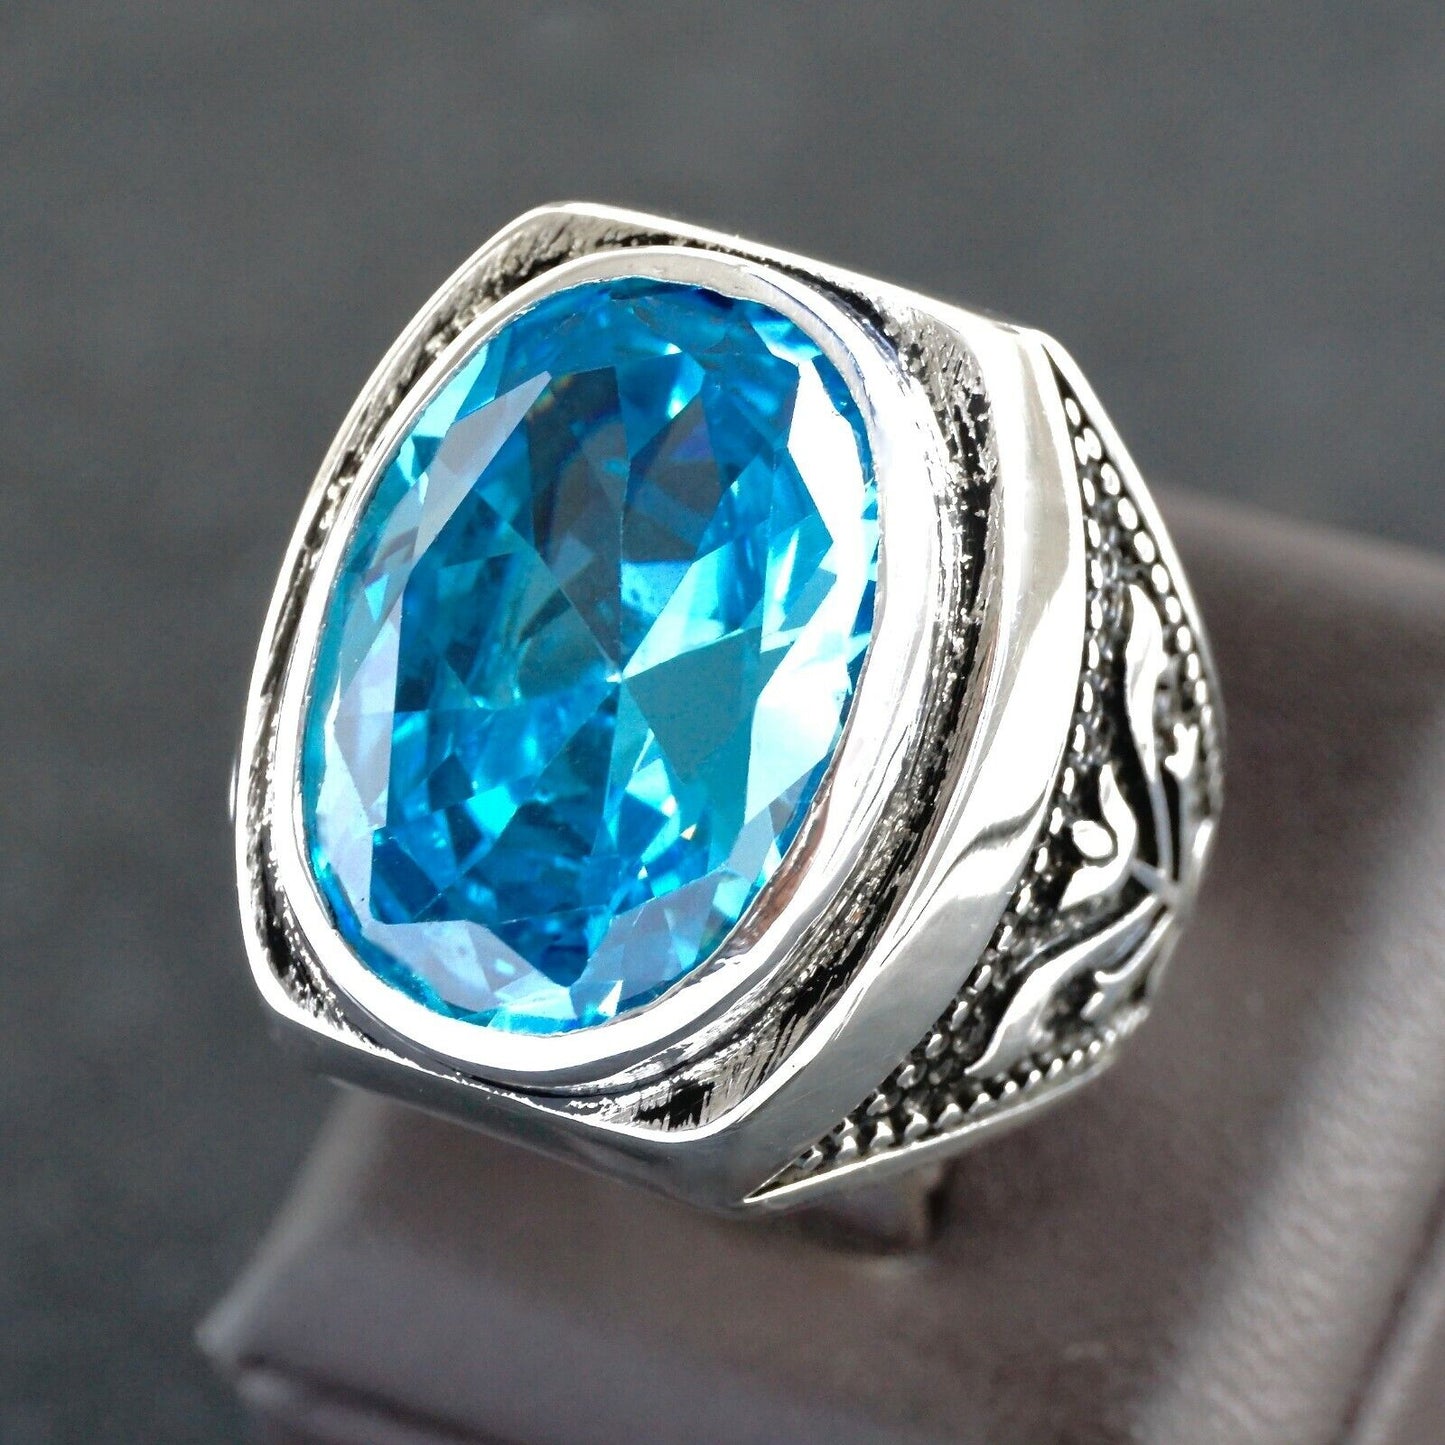 Sterling Silver Men’s Ring Swiss Blue Topaz Artisan Handcrafted Unique Jewelry